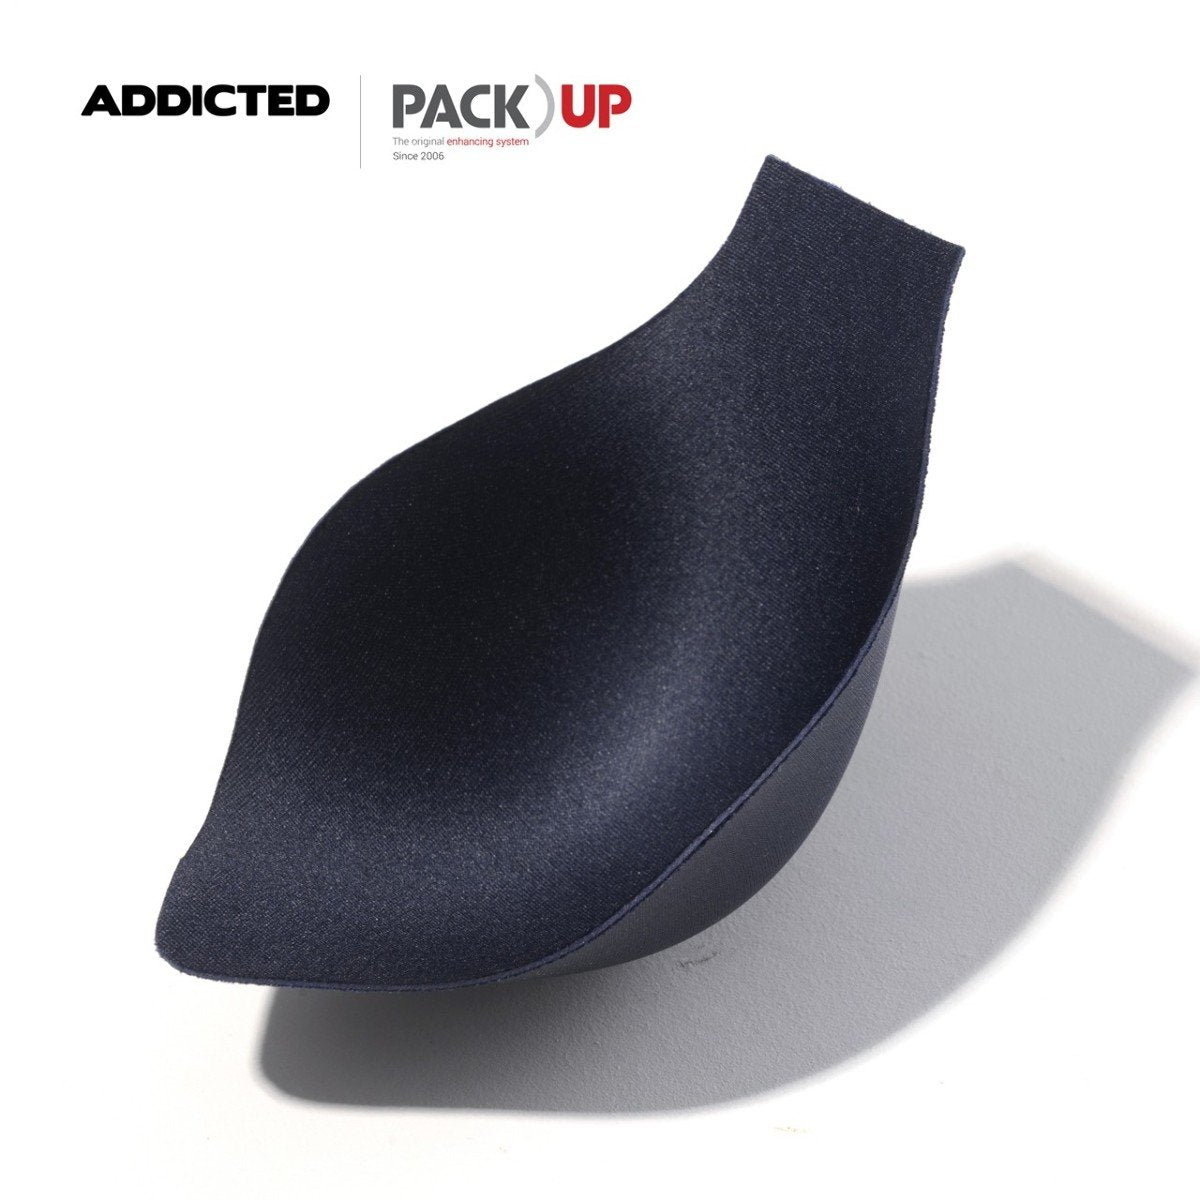 ADDICTED PACK UP - NAVY